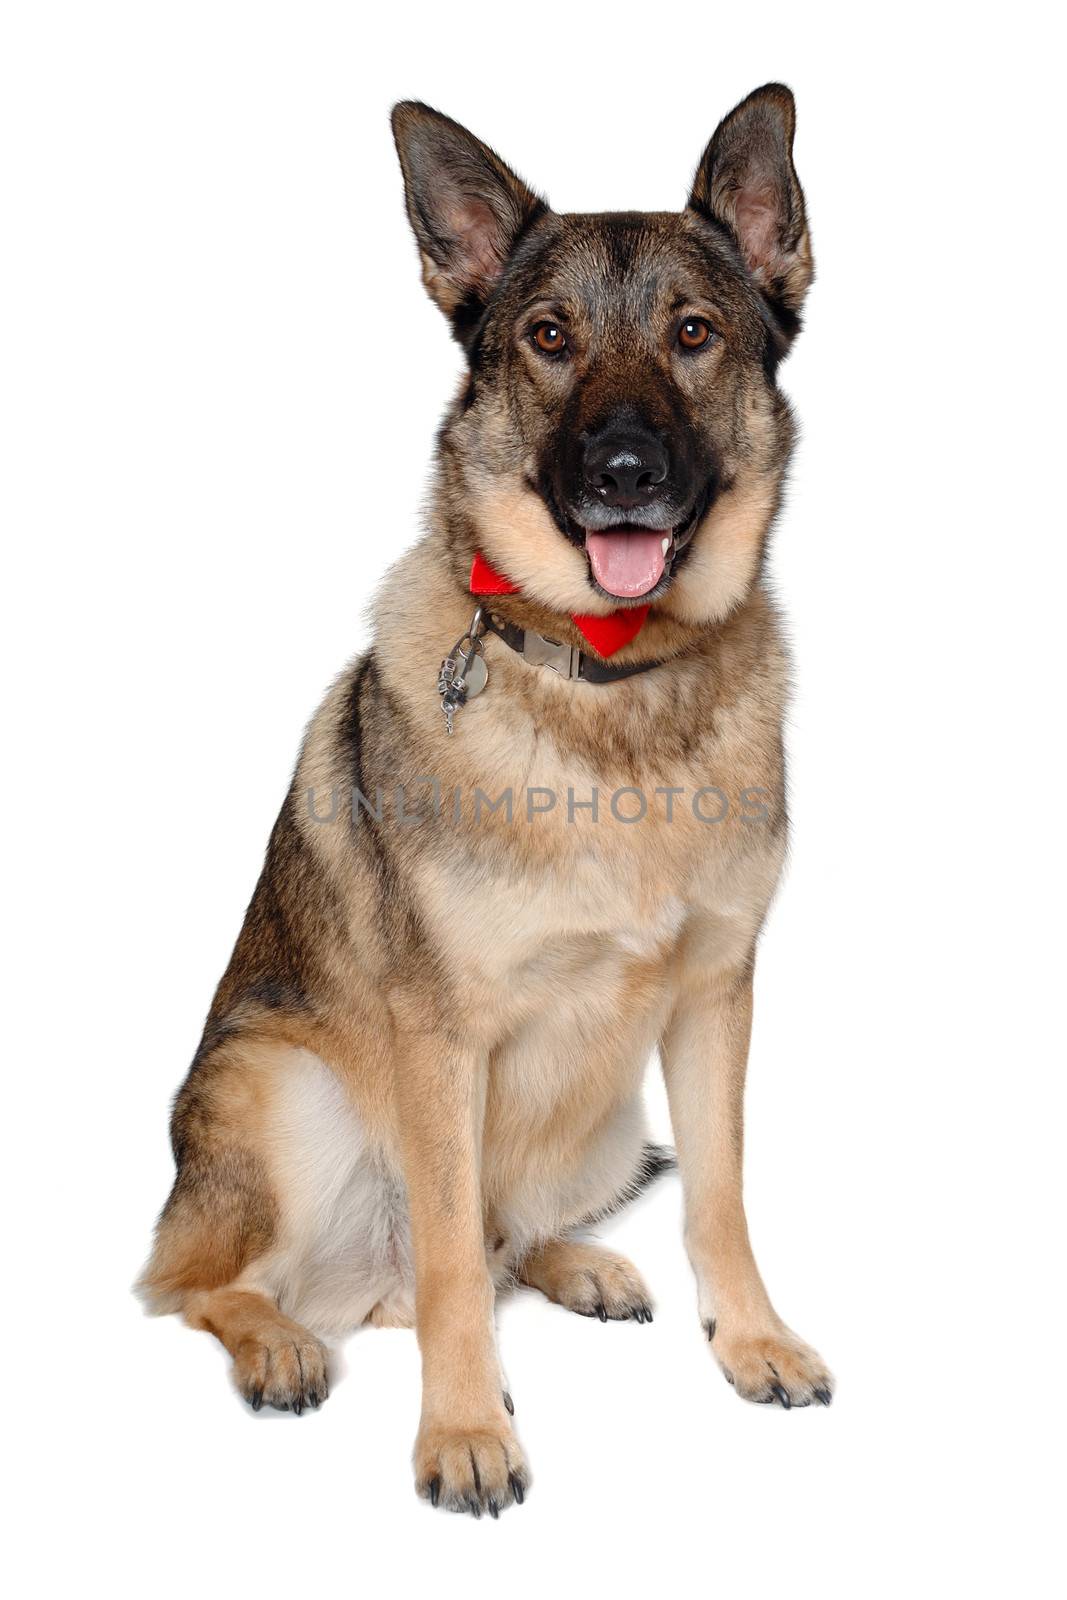 German shepherd dog is sitting on a white background